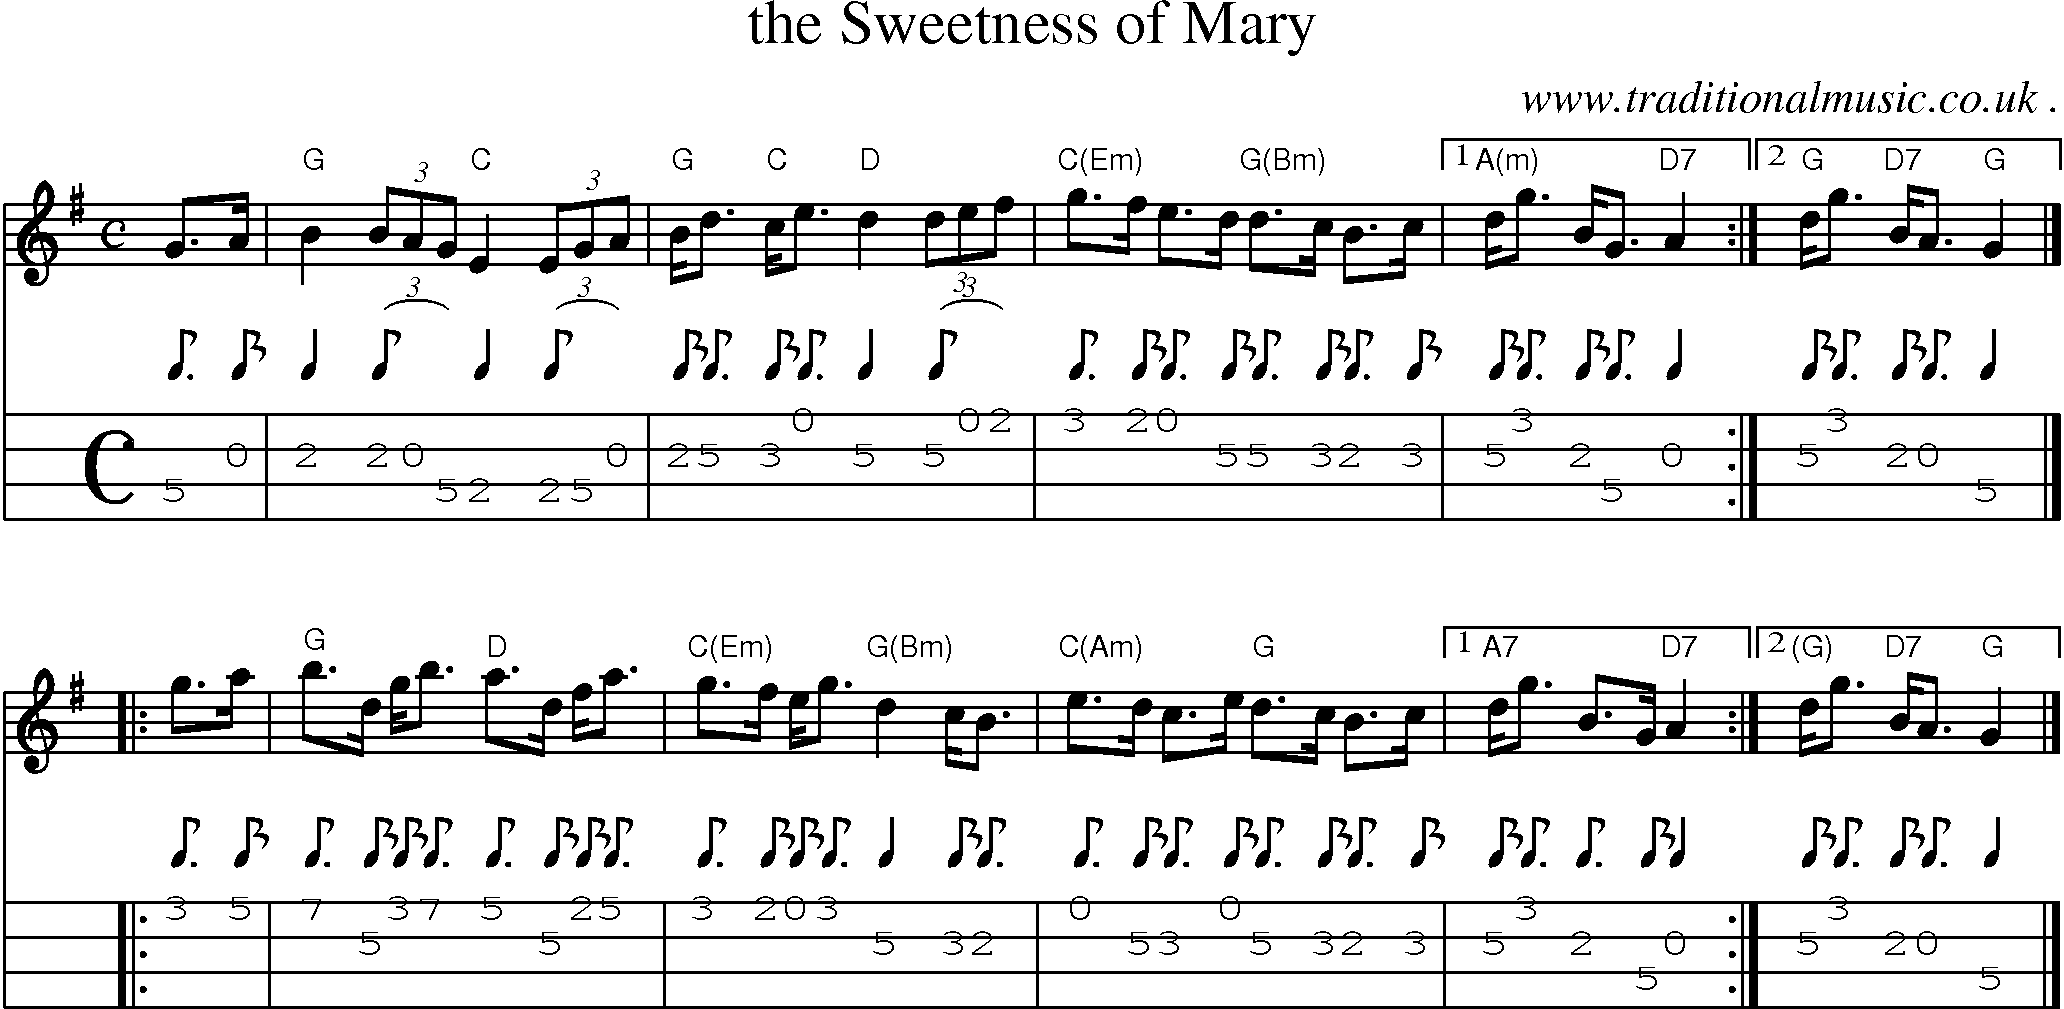 Sheet-music  score, Chords and Mandolin Tabs for The Sweetness Of Mary